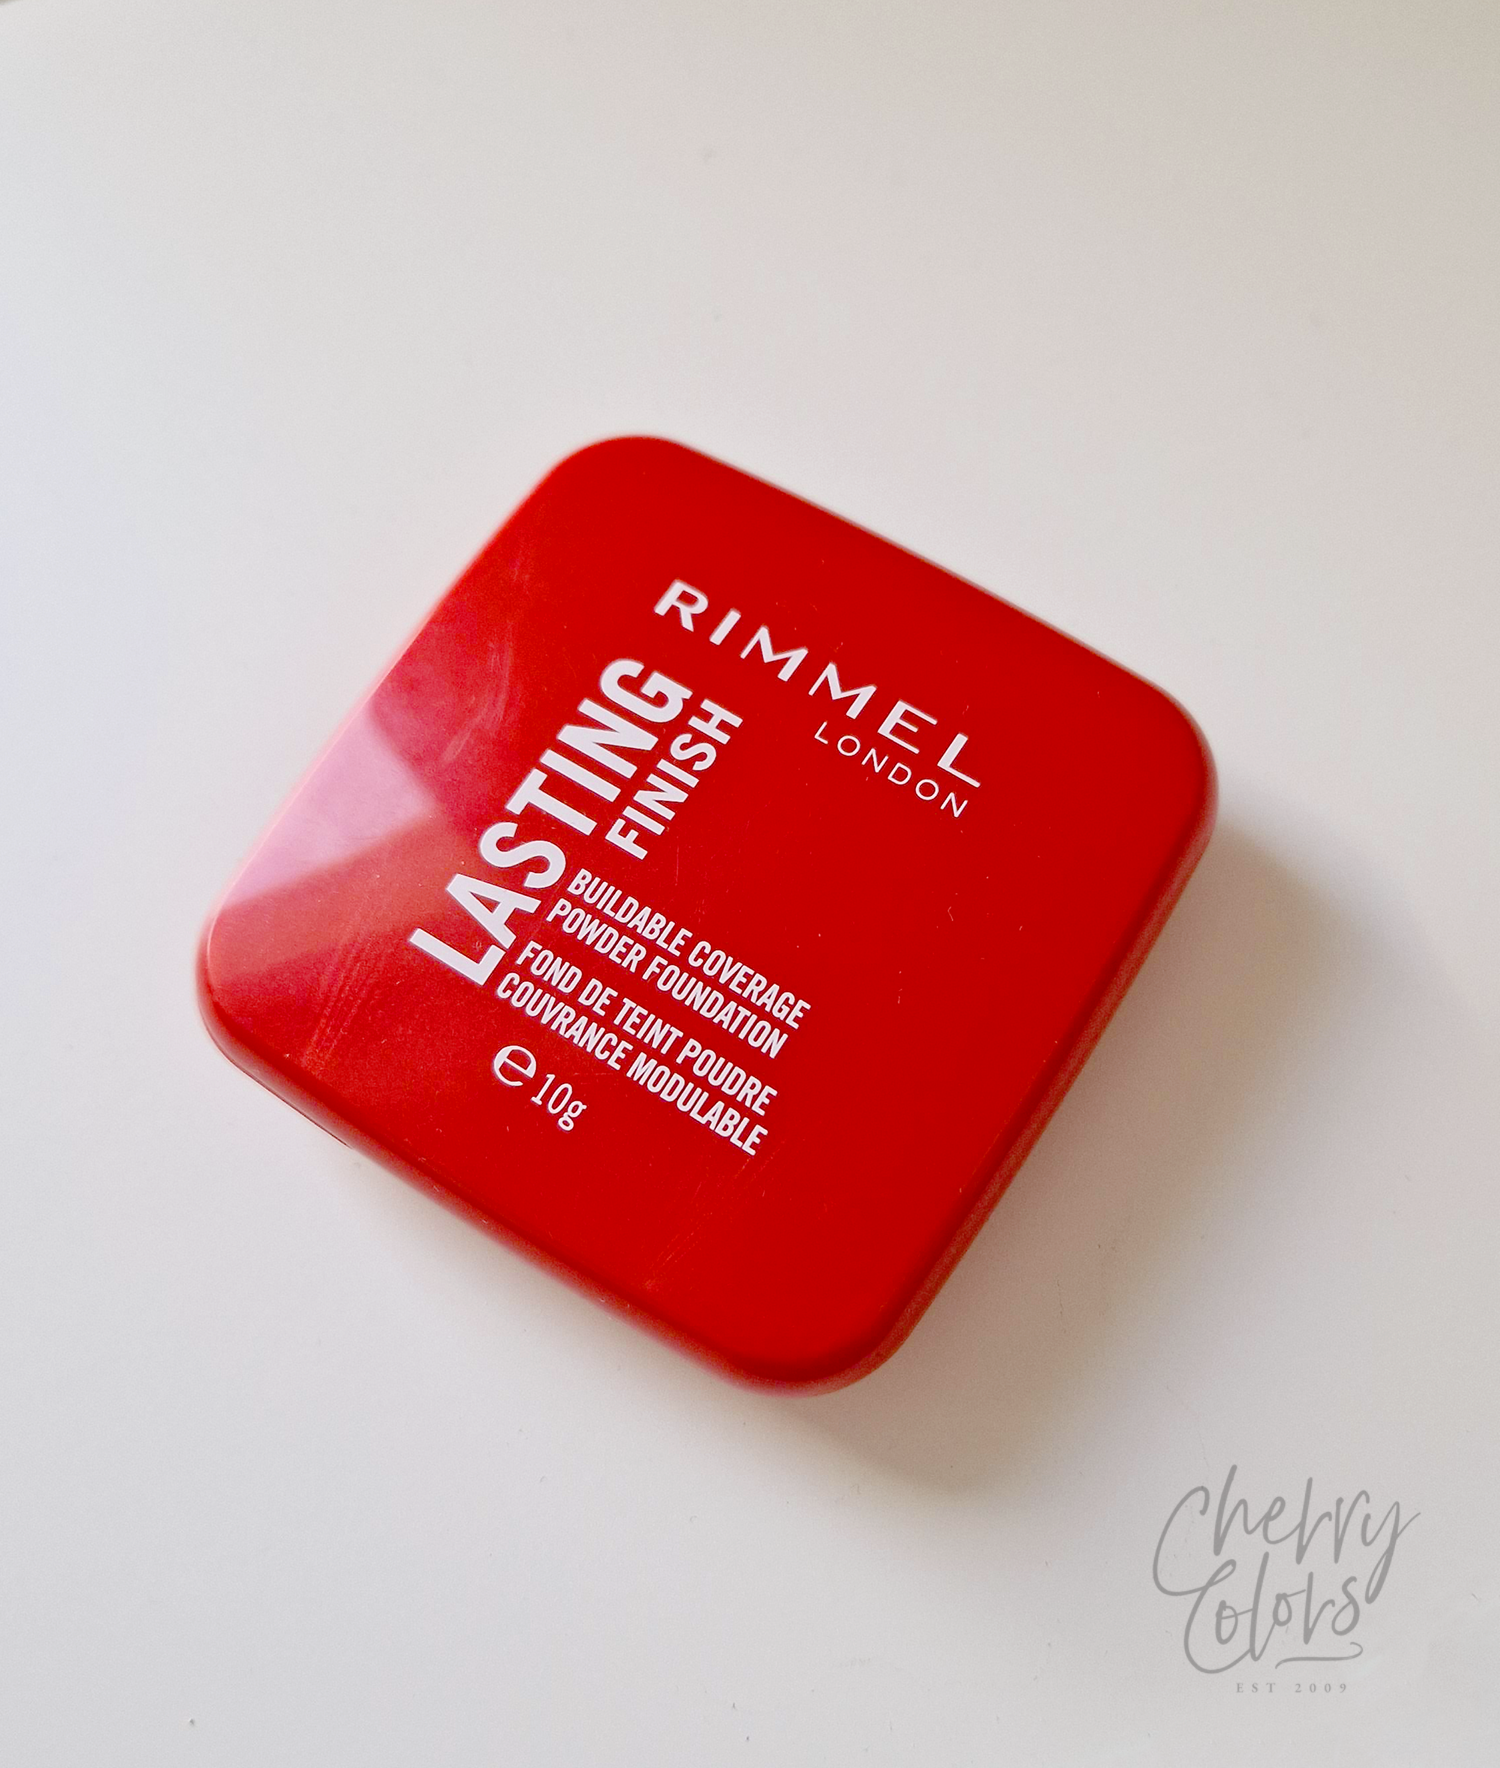 Review: Rimmel Lasting Finish Compact Foundation